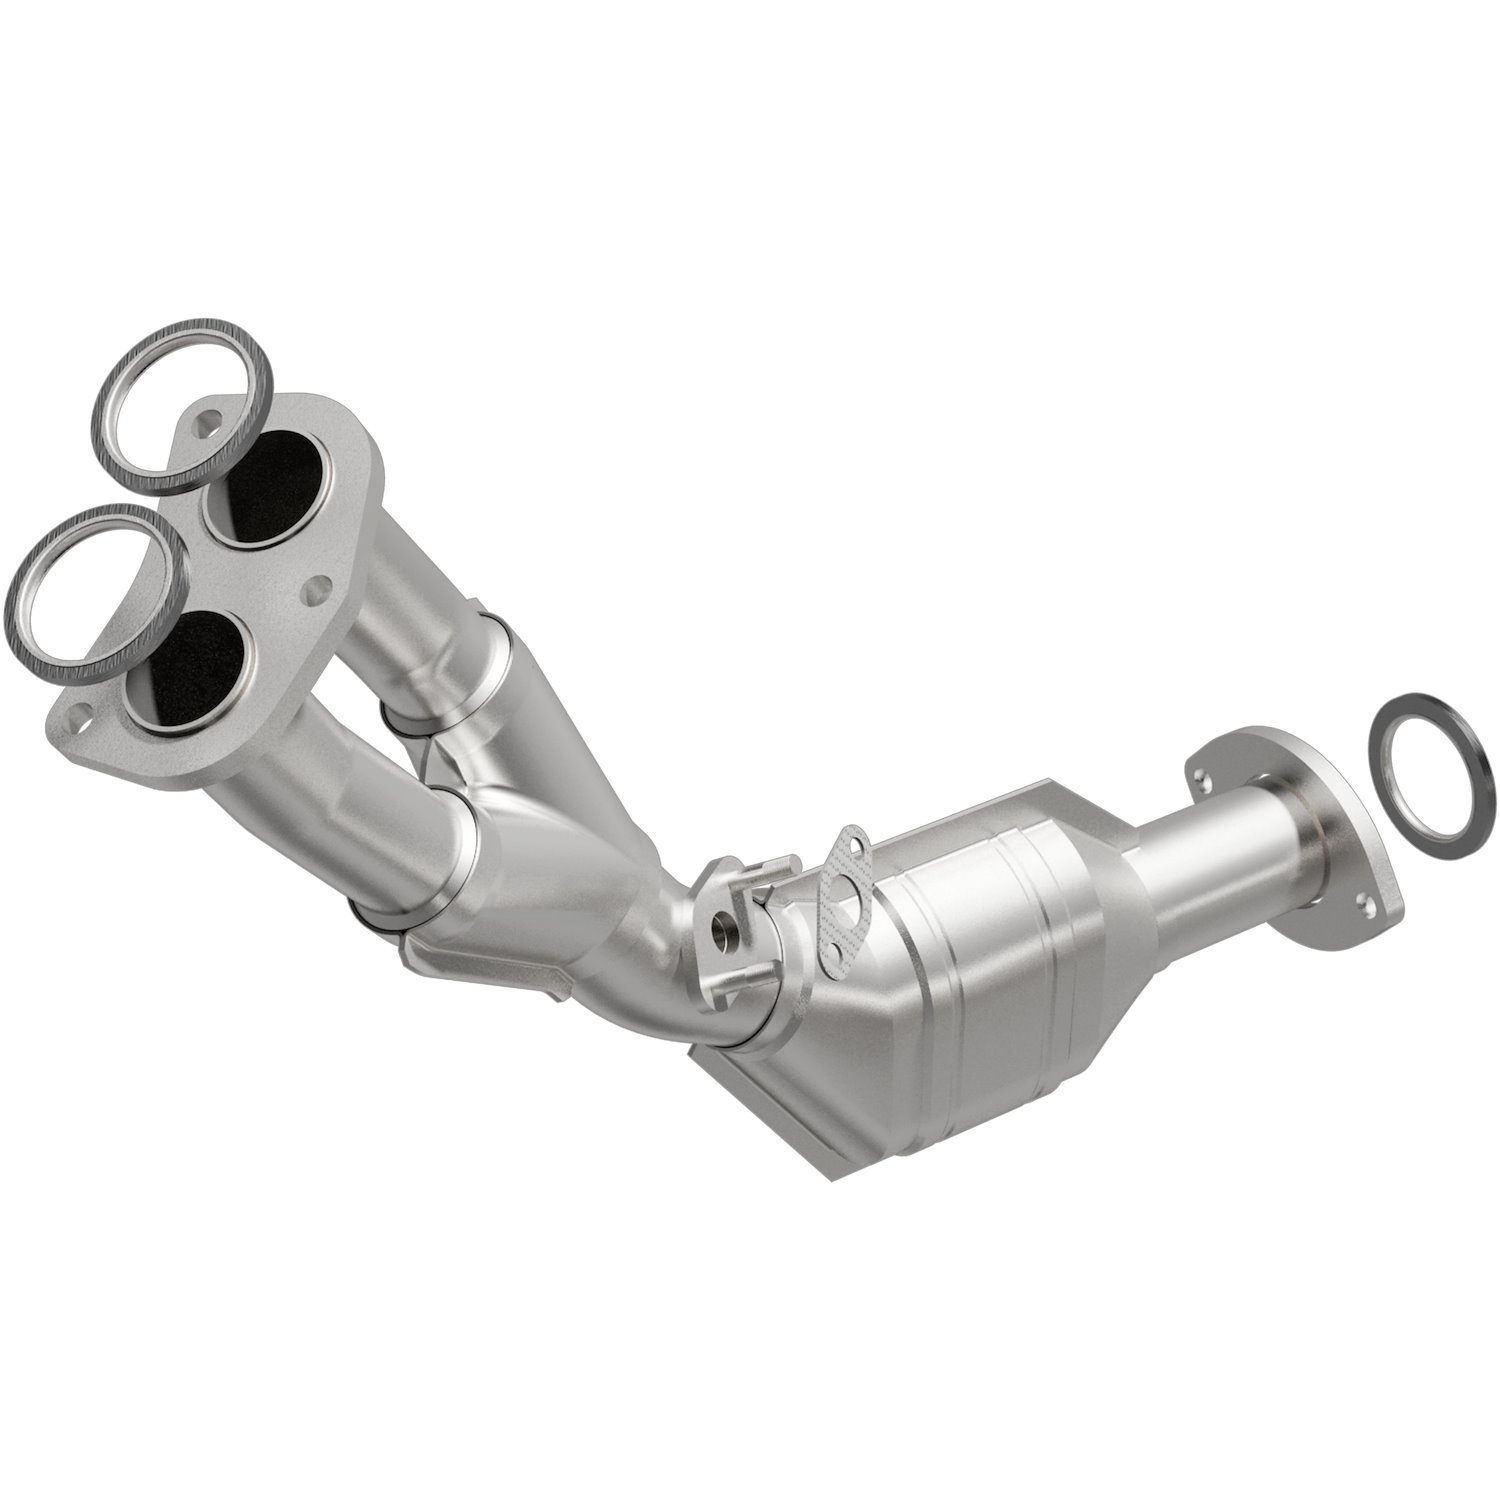 2000-2004 Toyota Tacoma OEM Grade Federal / EPA Compliant Direct-Fit Catalytic Converter